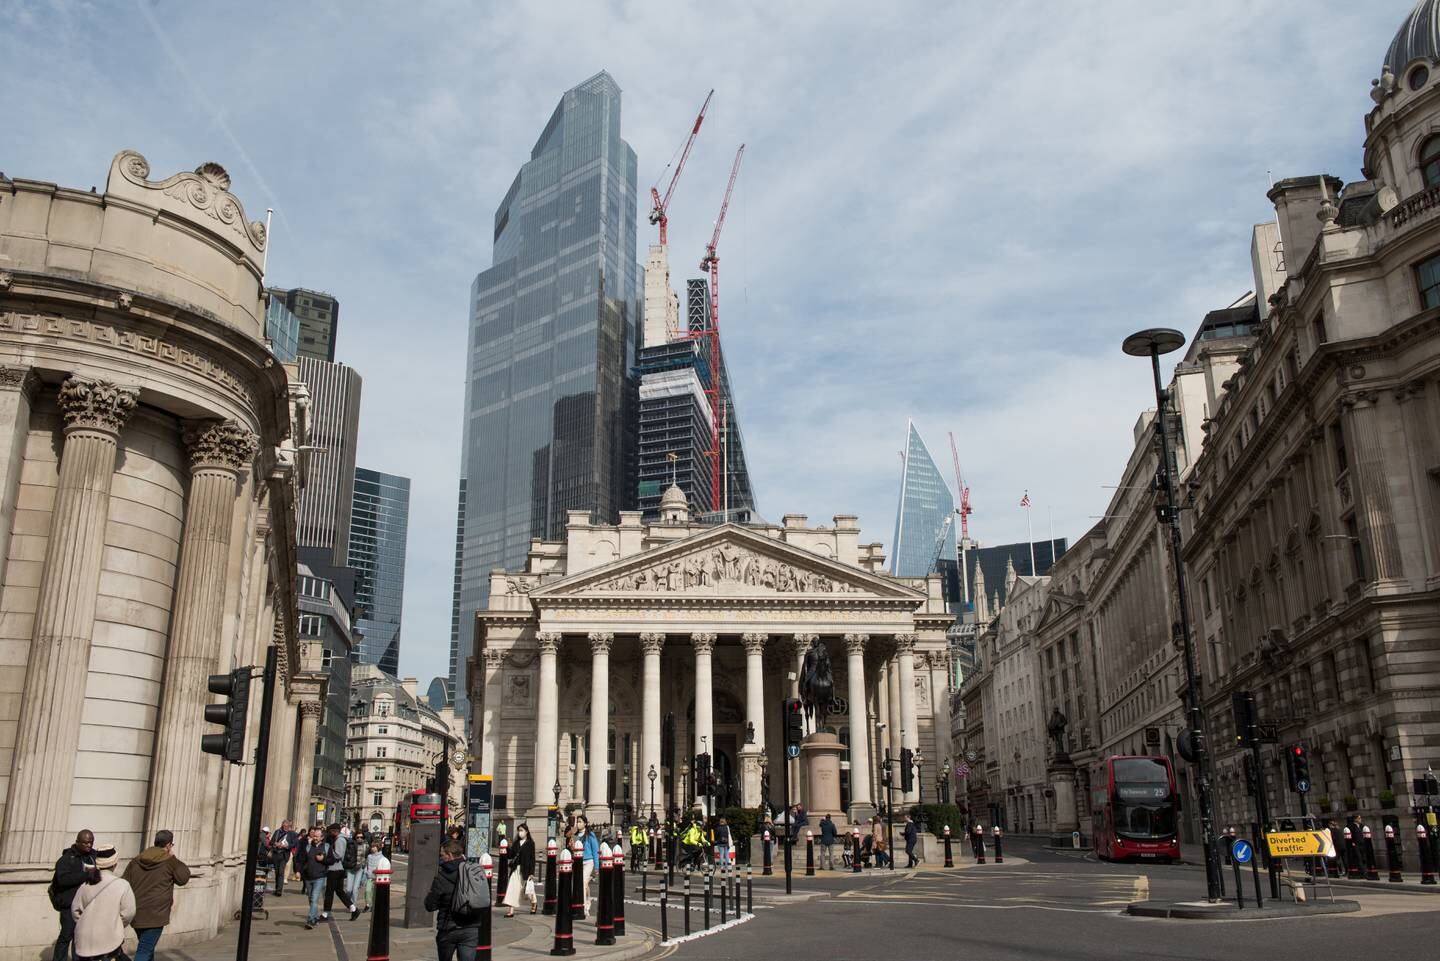 The Leadenhall 'Cheesgrater; building in London is owned by Hong Kong CC Land Holdings. Getty